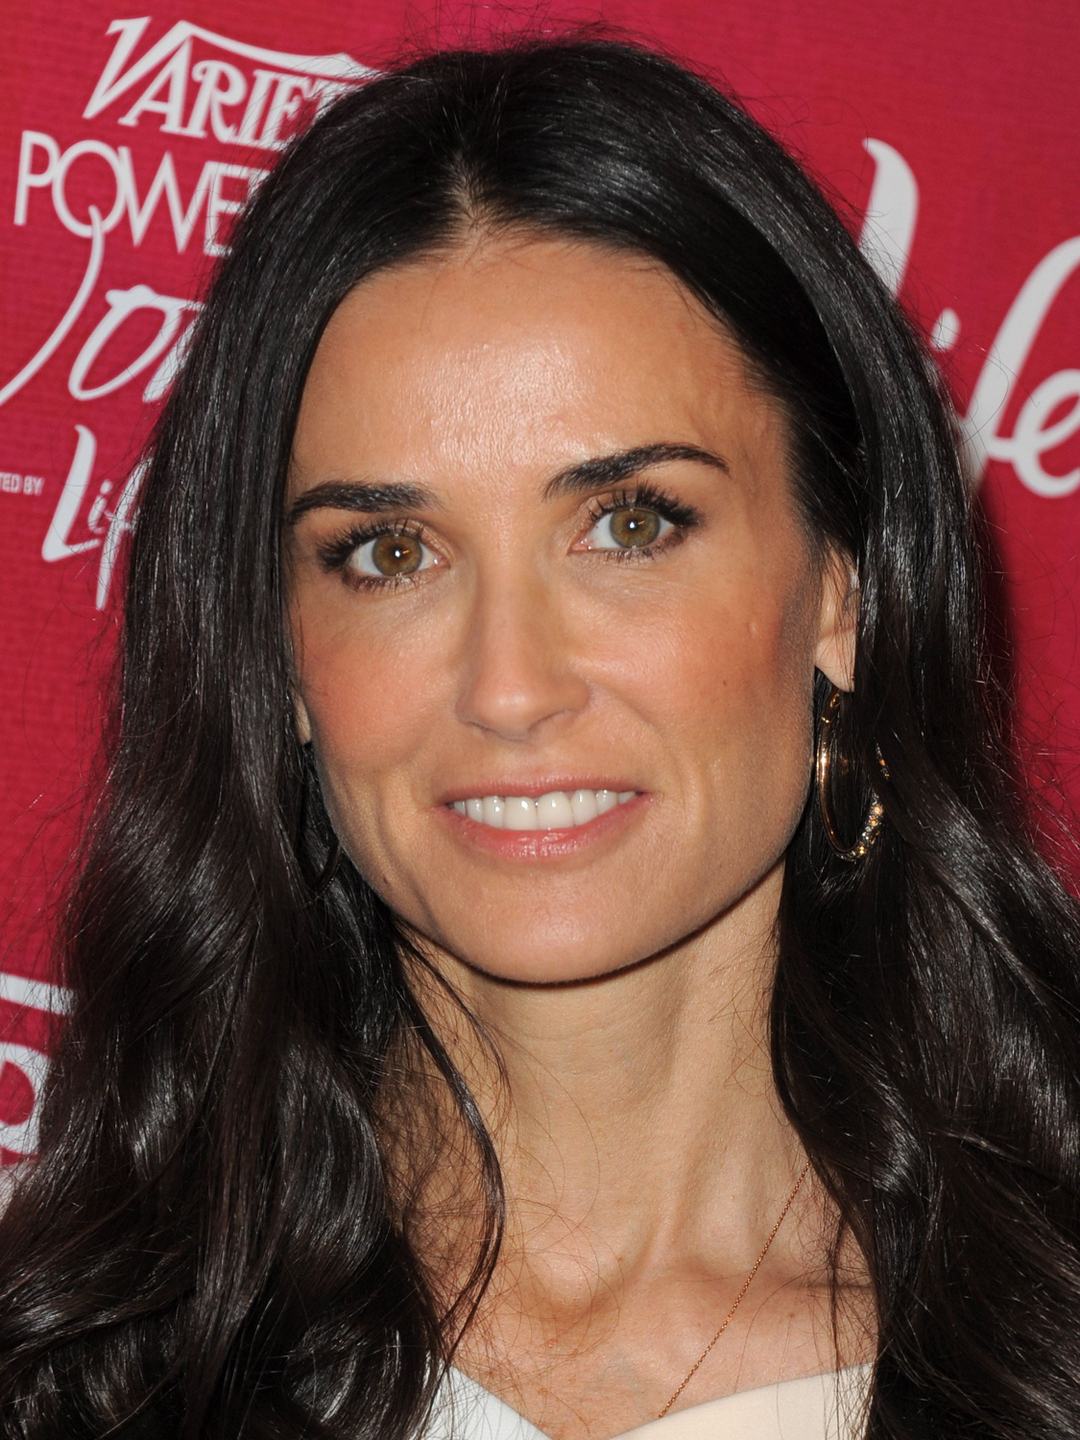 Demi Moore early life